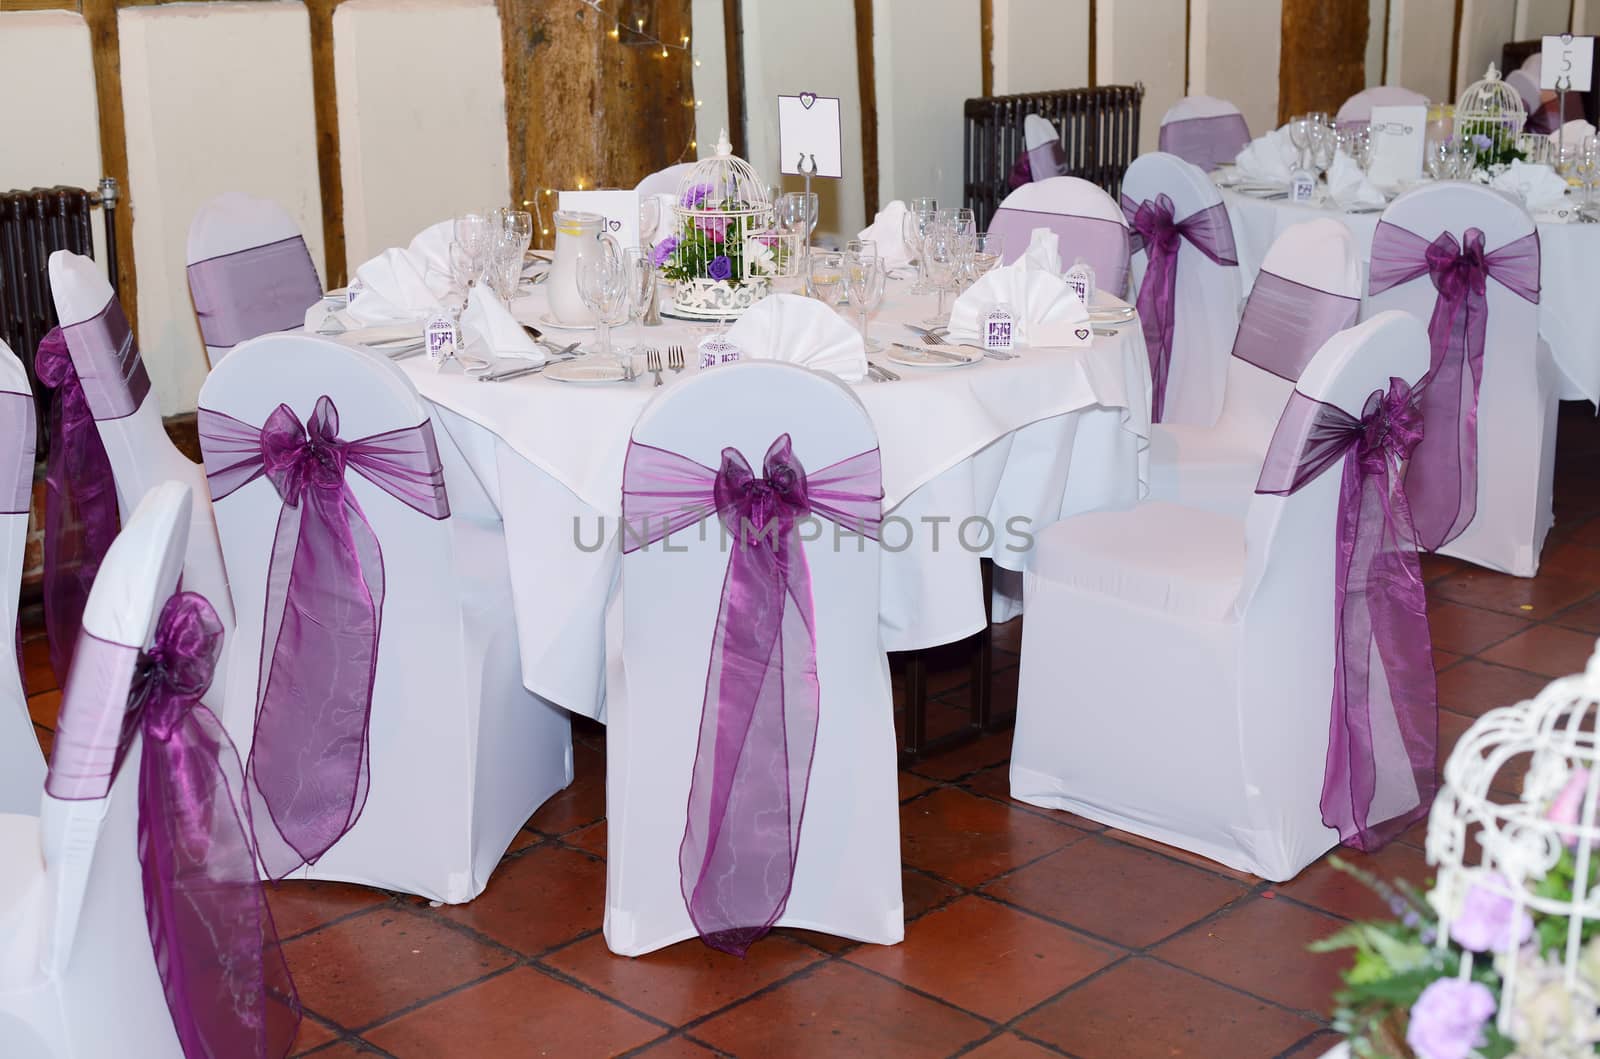 Wedding reception showing chair and table covers in white and purple